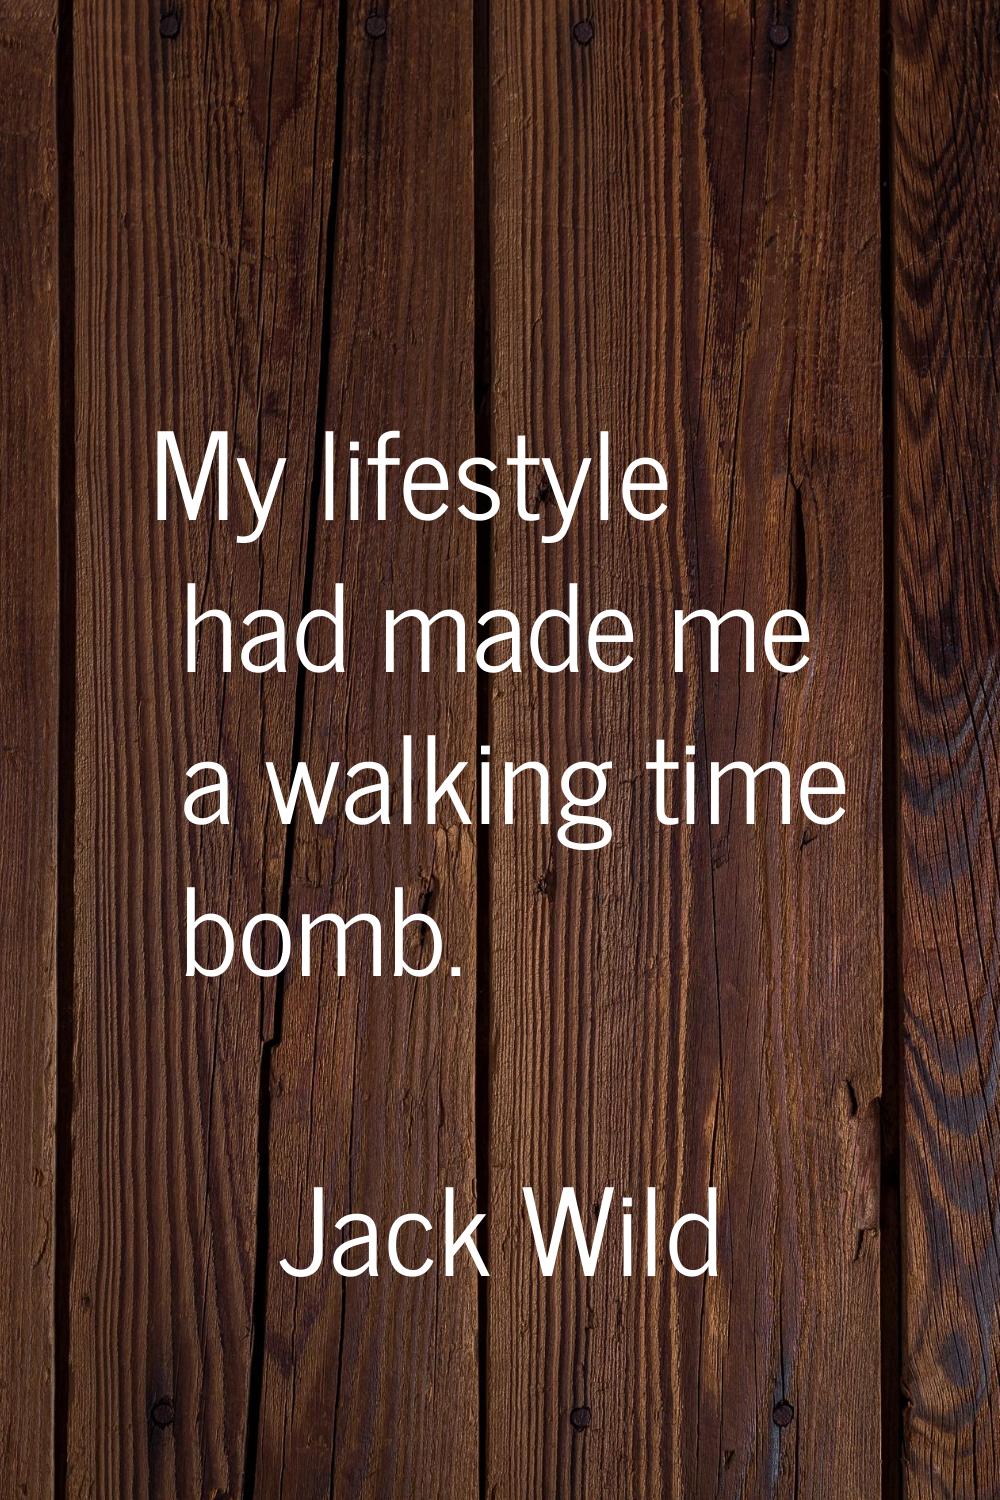 My lifestyle had made me a walking time bomb.